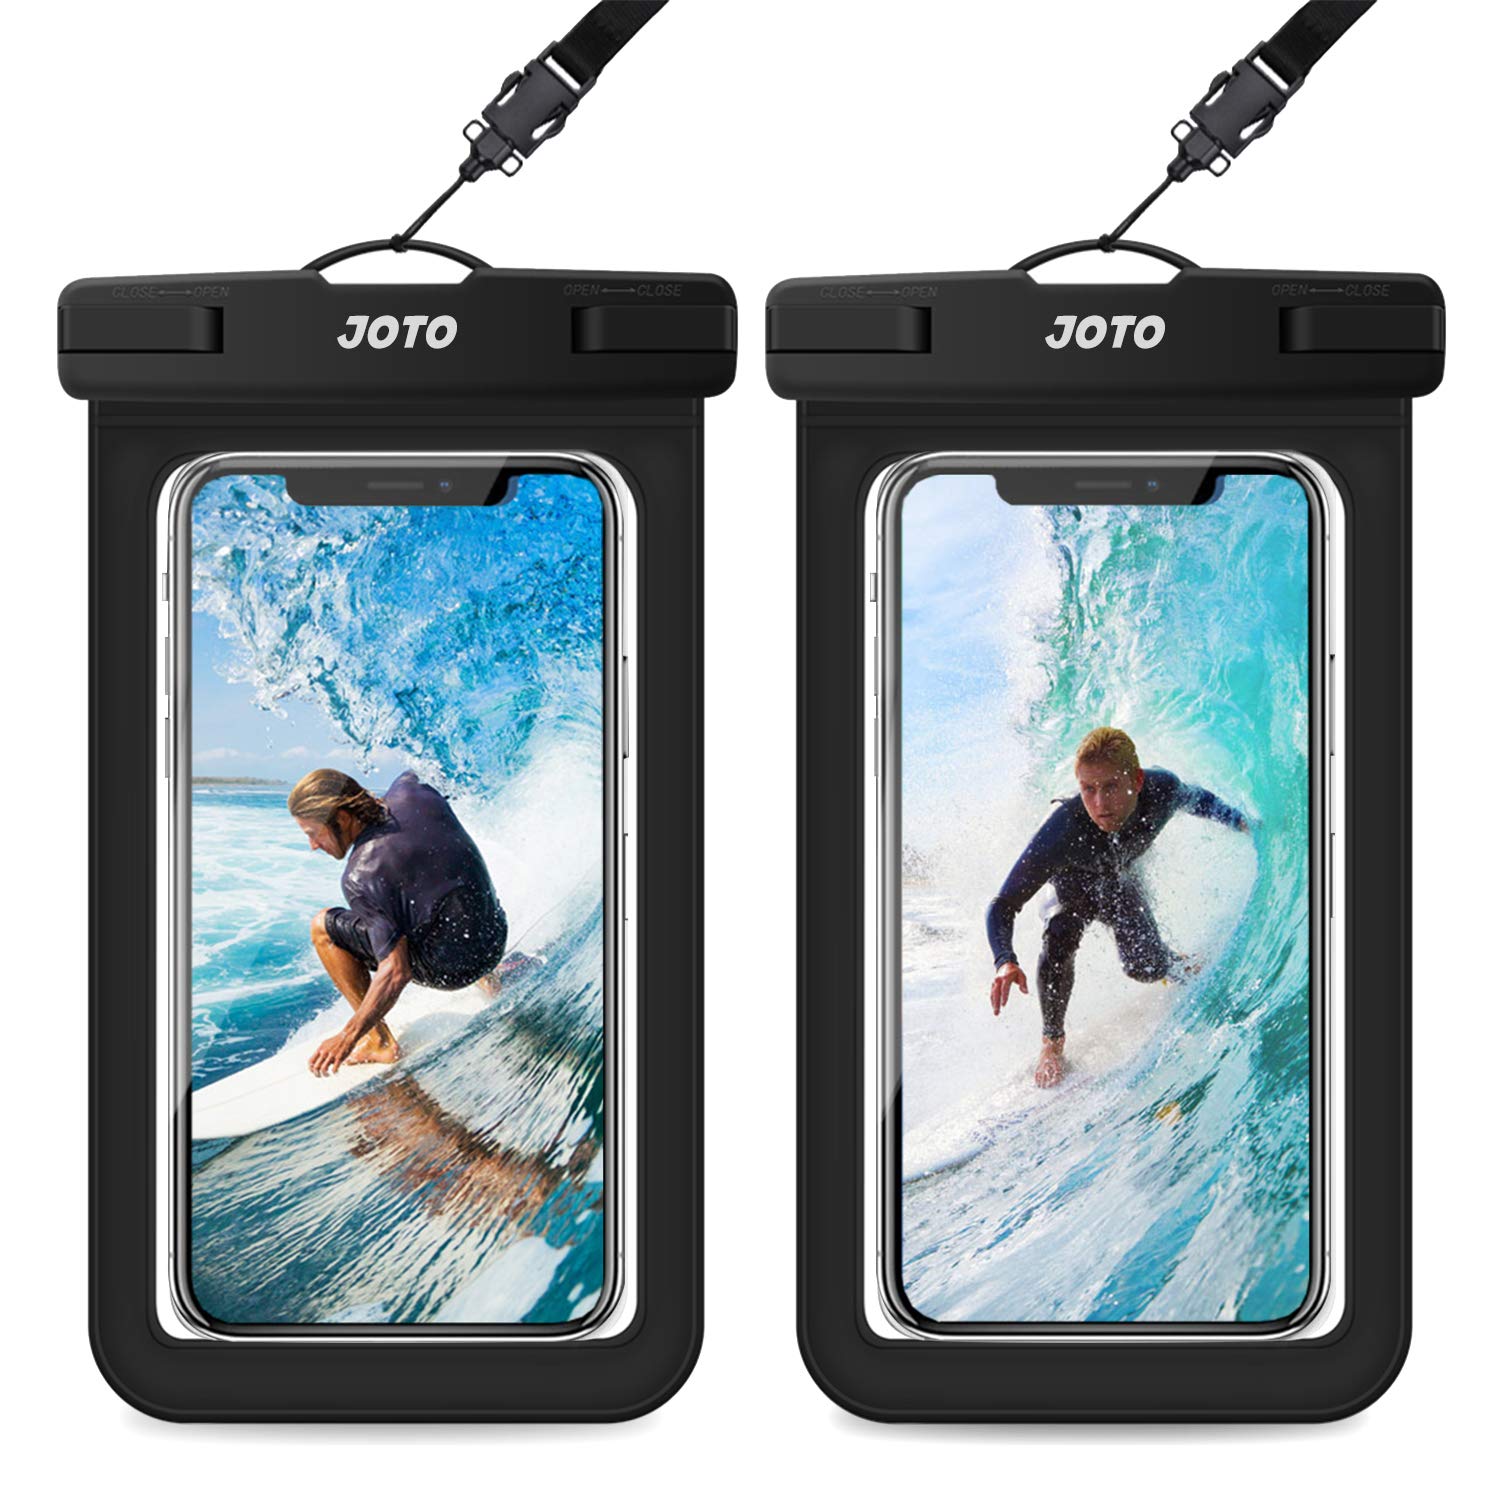 JOTO Waterproof Phone Pouch IPX8 Universal Waterproof Case Dry Bag Phone Protector for iPhone 14 13 12 11 Pro Max Plus XS XR X 8 Galaxy S23 S22 S21 S20 Pixel Up to 7